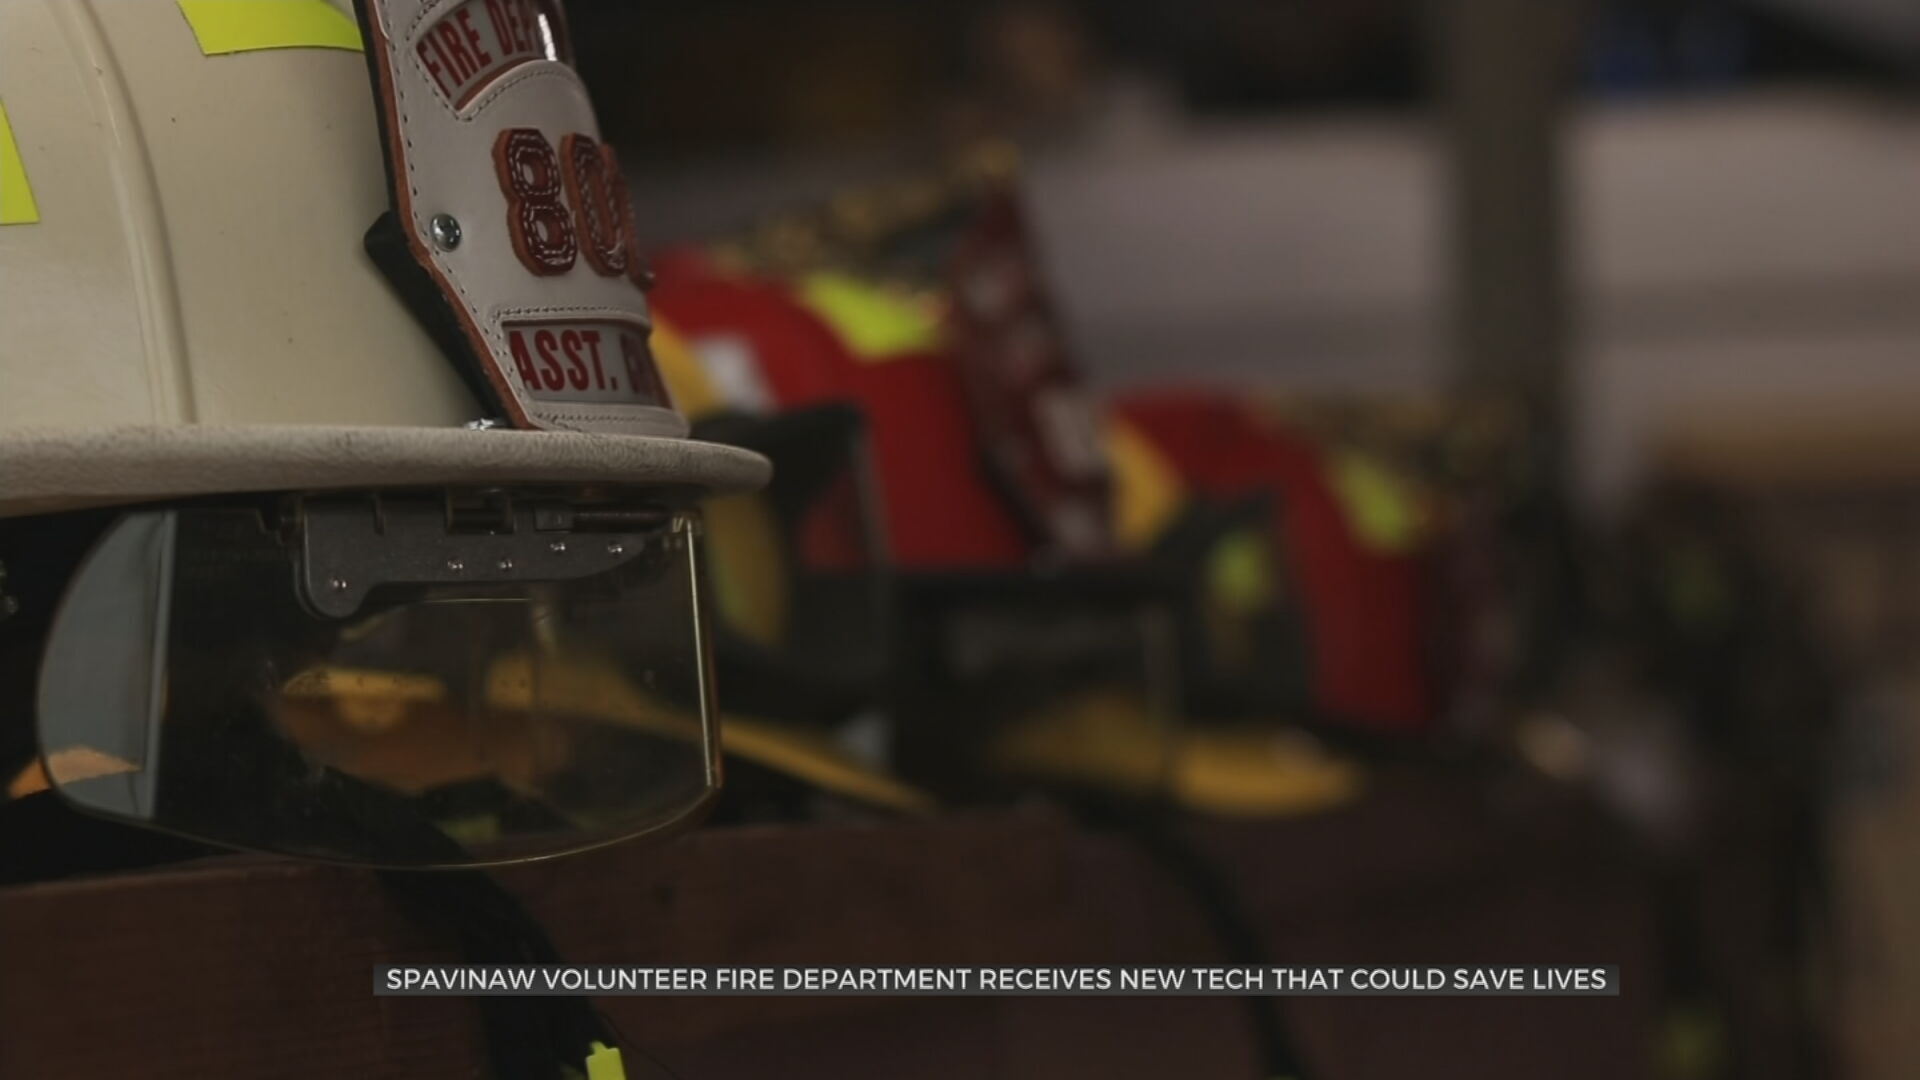 Spavinaw Fire Department Says Their New High-Tech Equipment Could Save Lives 